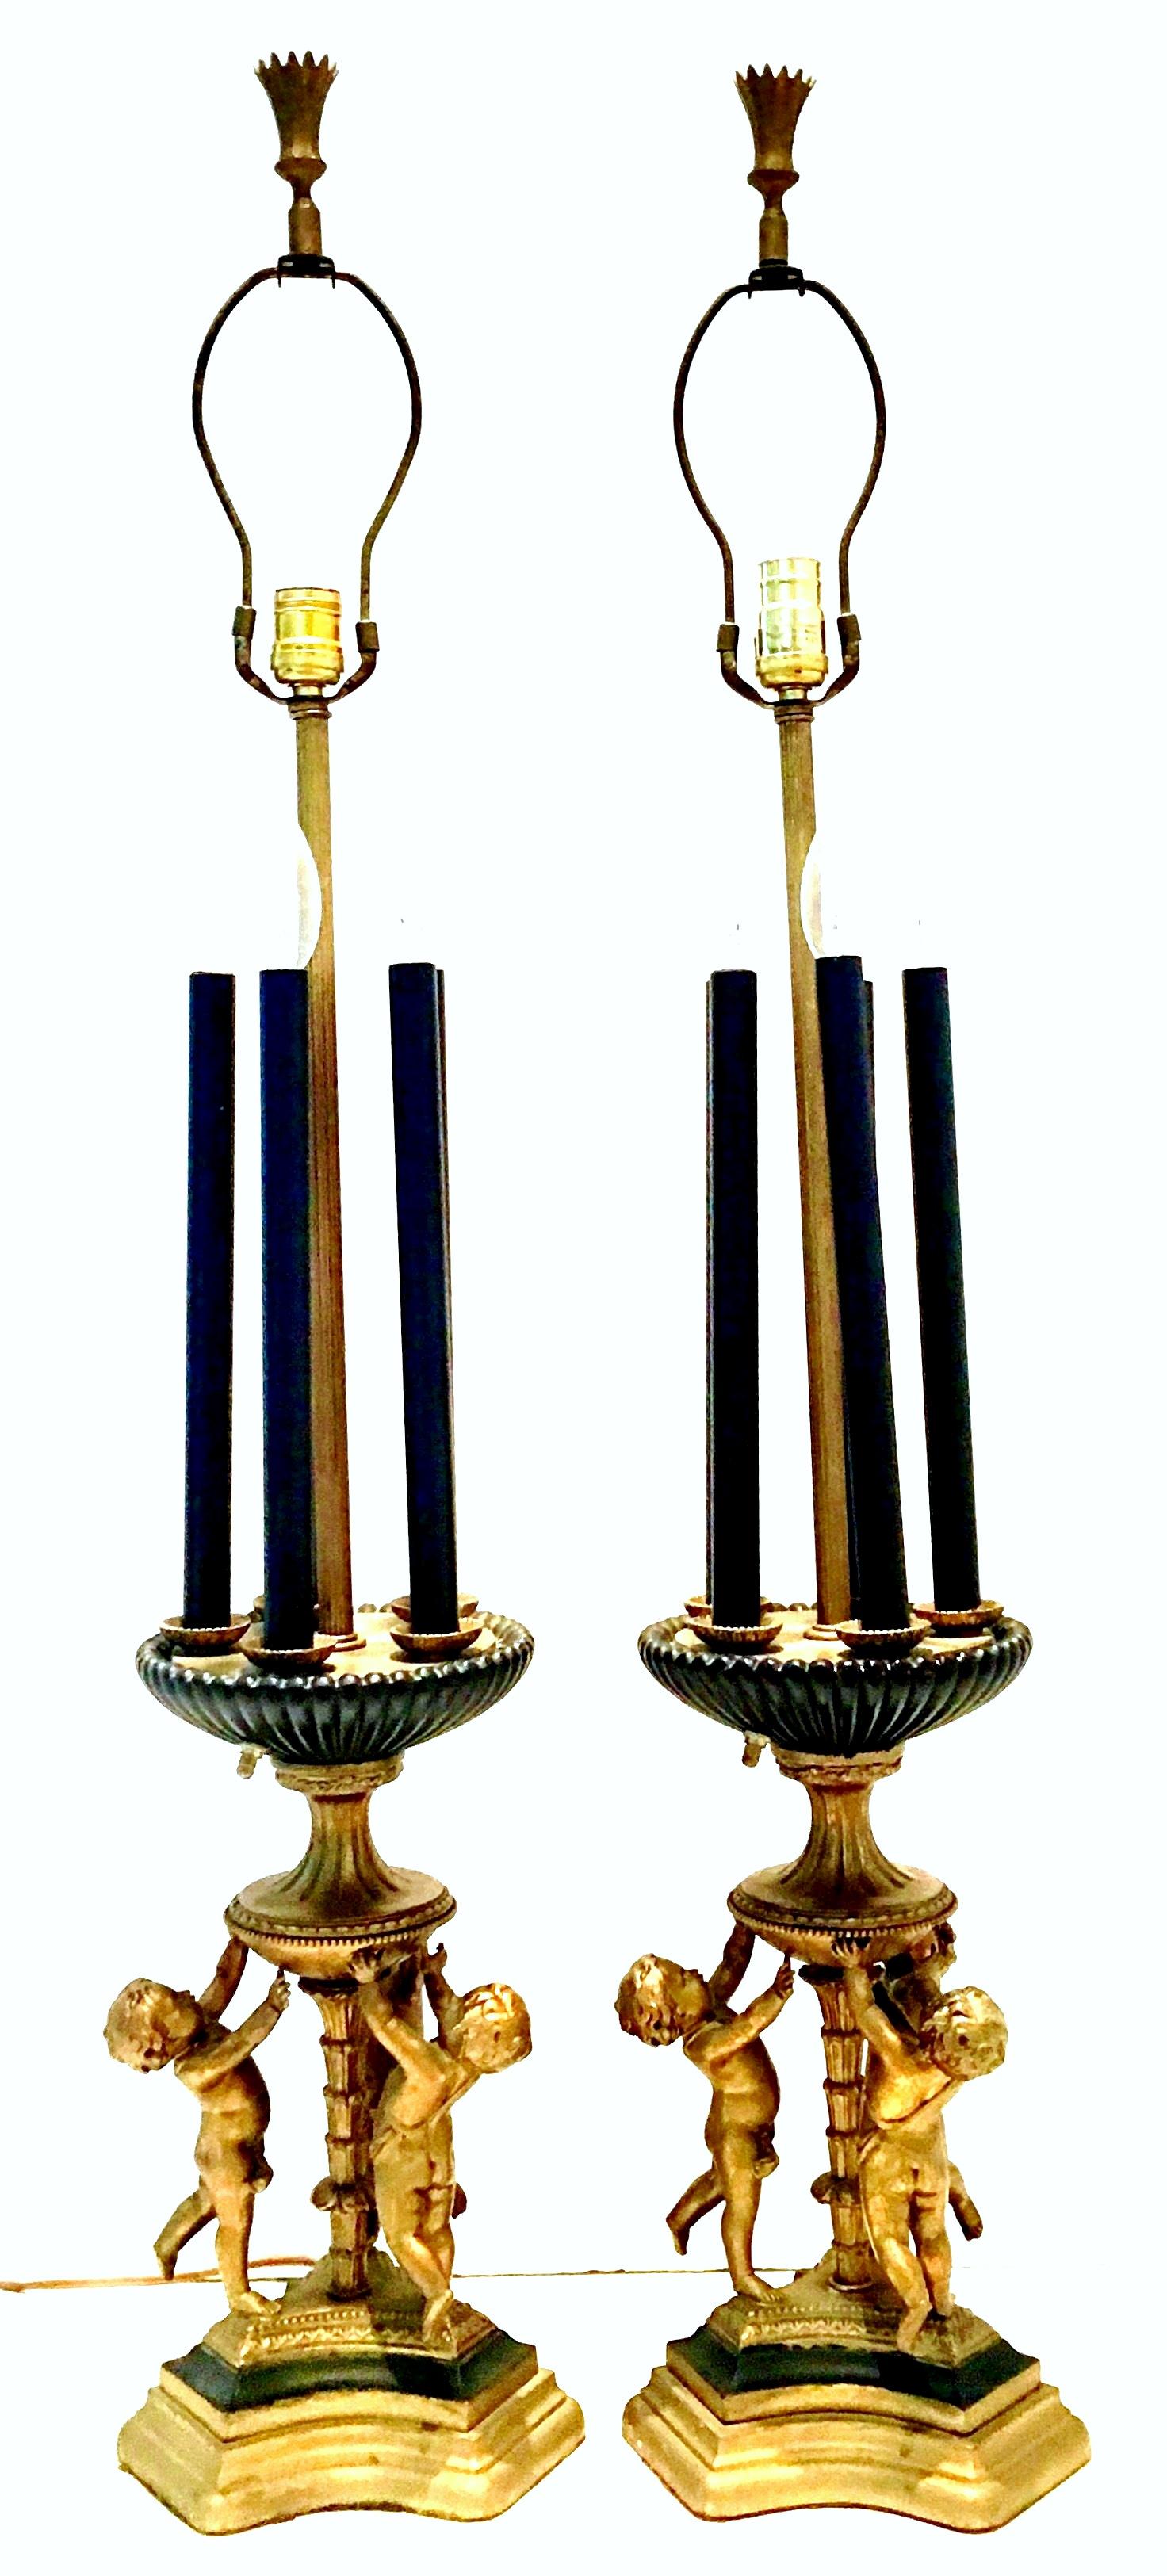 Antique pair of monumental neoclassical gilt bronze and wood six-light candelabra lamps & original shades. This monumental 45.5